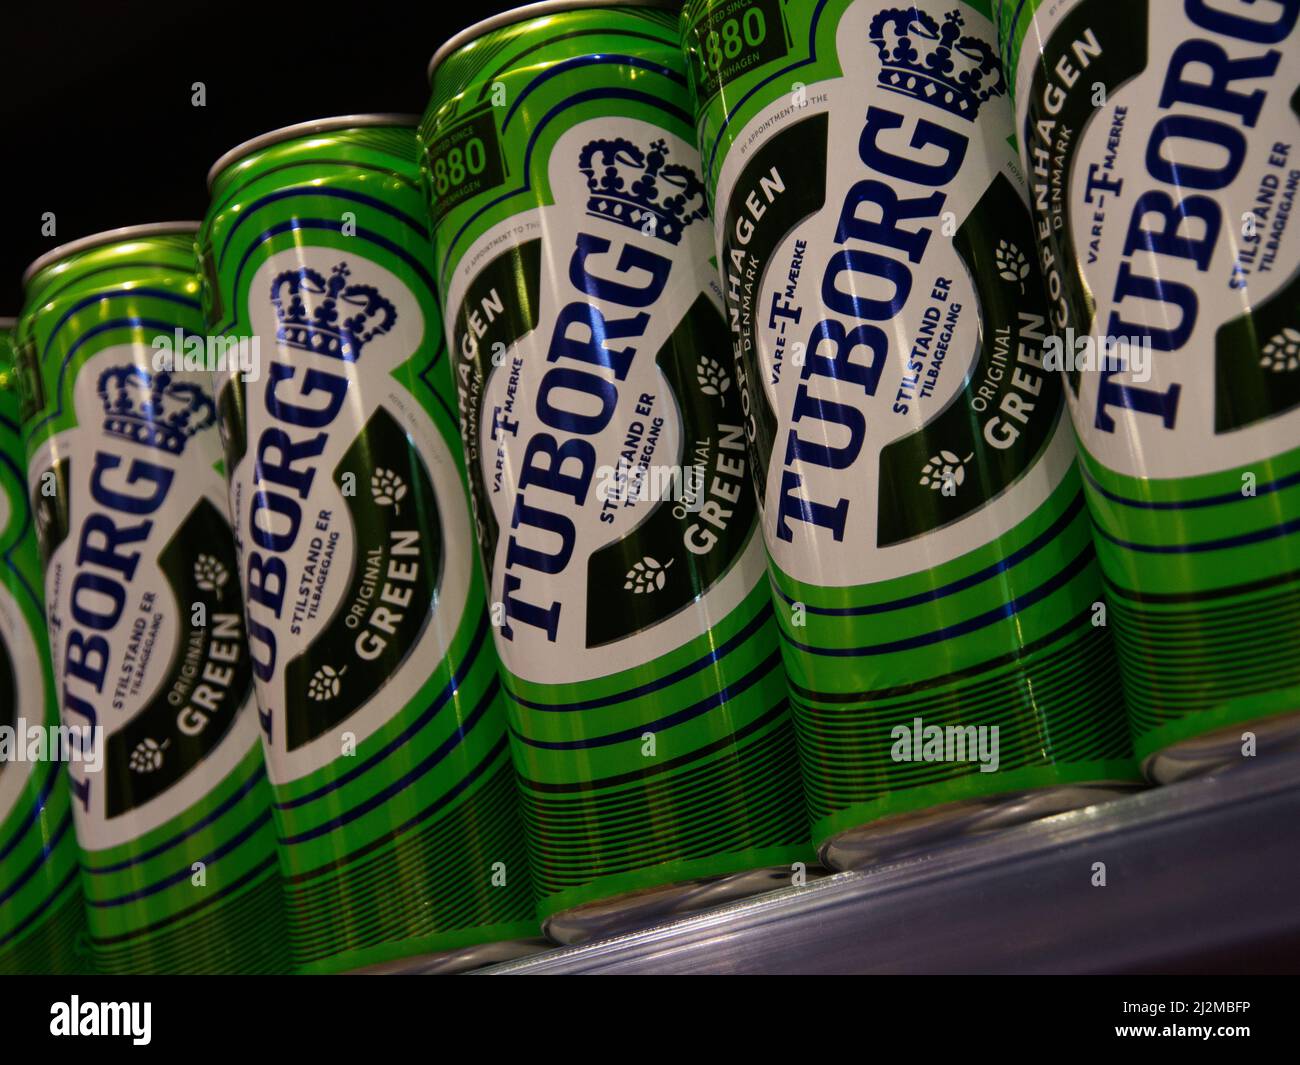 Moscow, Russia. 31st Mar, 2022. Tuborg beer cans on the supermarket shelf. It was reported that Carlsberg Group is leaving the Russian market and plans to transfer the local business to a new investor. The Danish brewing company 'Carlsberg' is represented in Russia by the brands 'Carlsberg', 'Kronenbourg', 'Holsten' and 'Tuborg' (Photo by Alexander Sayganov/SOPA Images/Sipa USA) Credit: Sipa USA/Alamy Live News Stock Photo